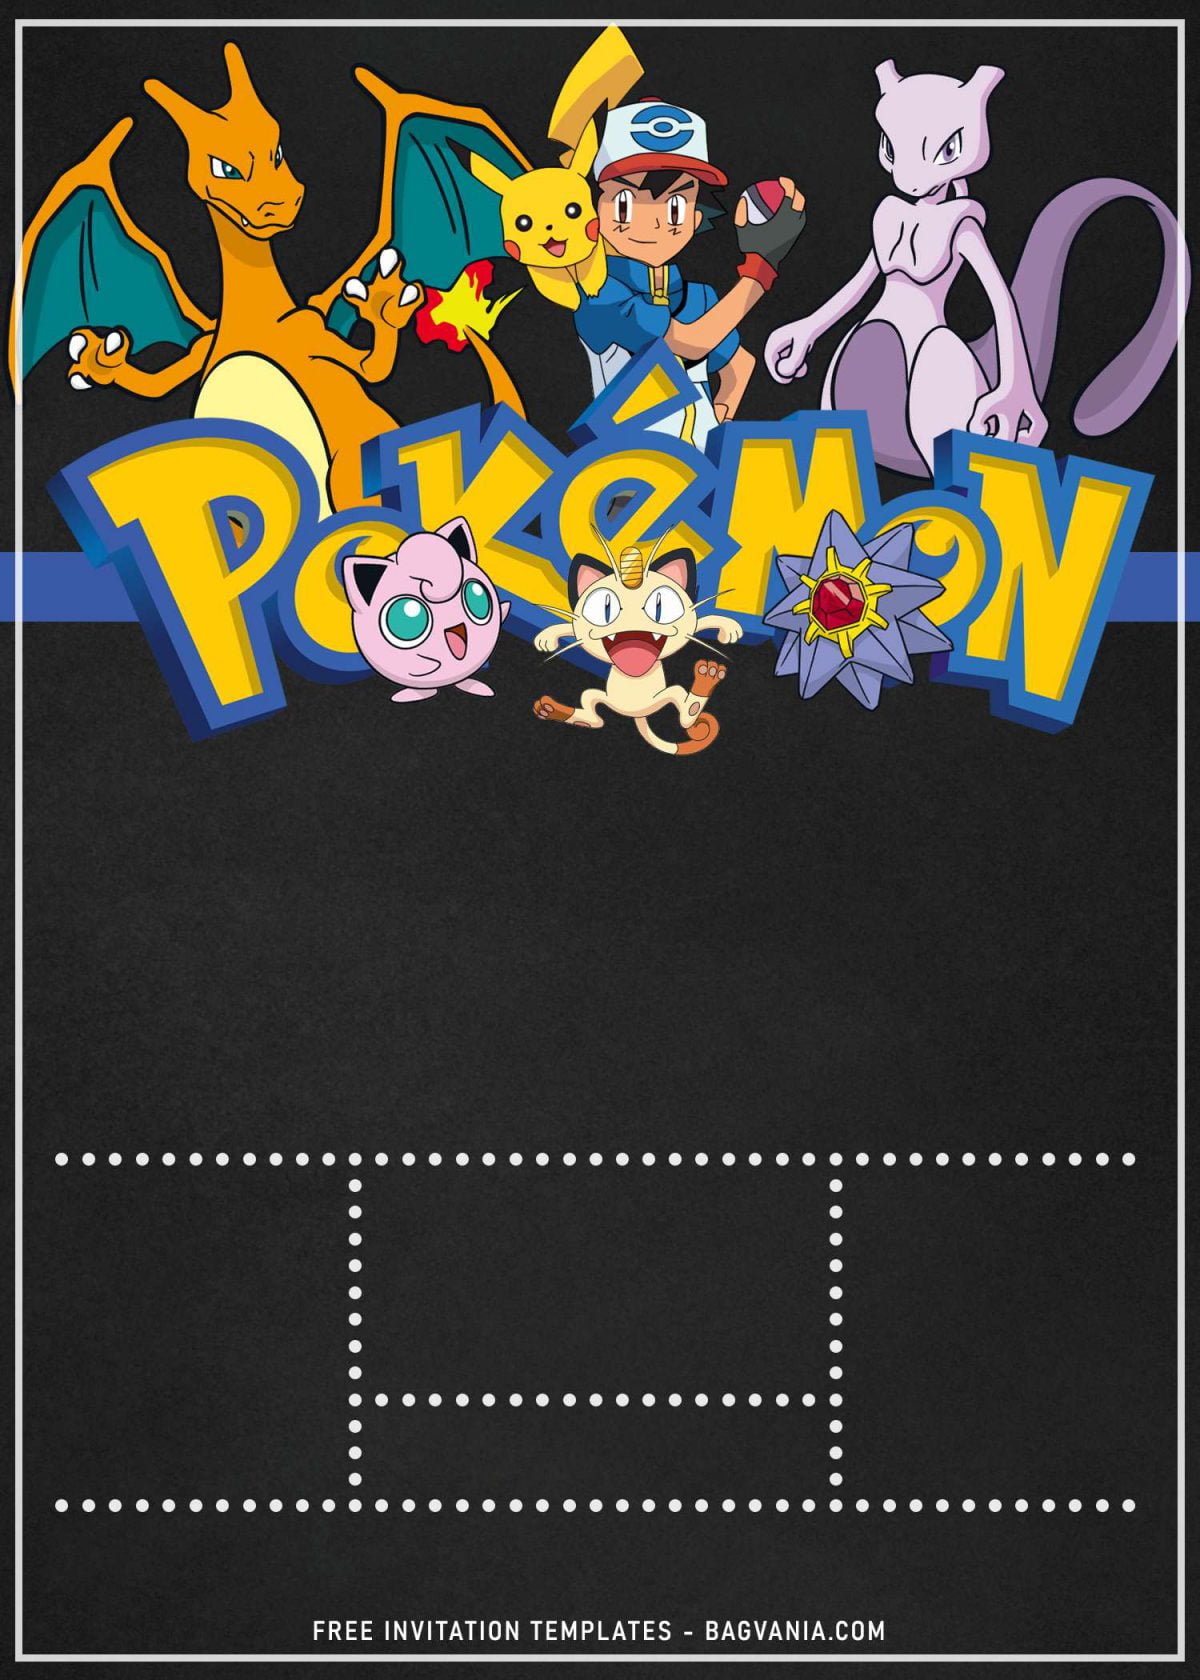 11+ Awesome Pokemon Chalkboard Invitation Templates For Boys Birthday Party and has Staryu and Meowth